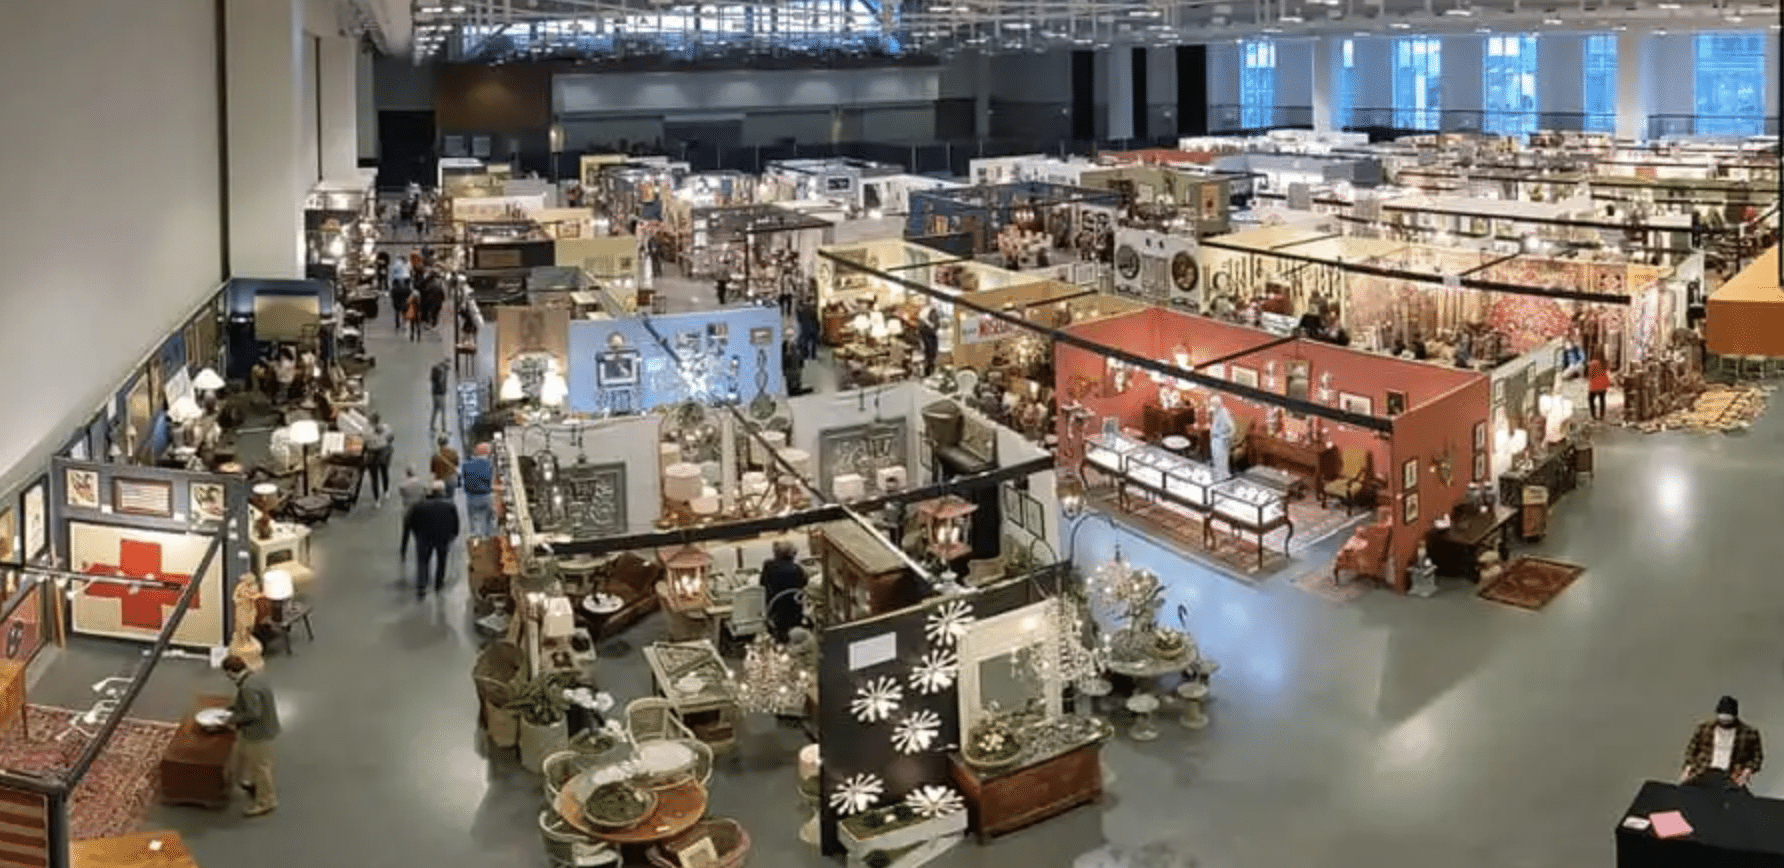 The Nashville Show_Jenkins and Co, The Nashville Show offers over 150 of America's Finest Antiques, Art & Vintage Dealers!